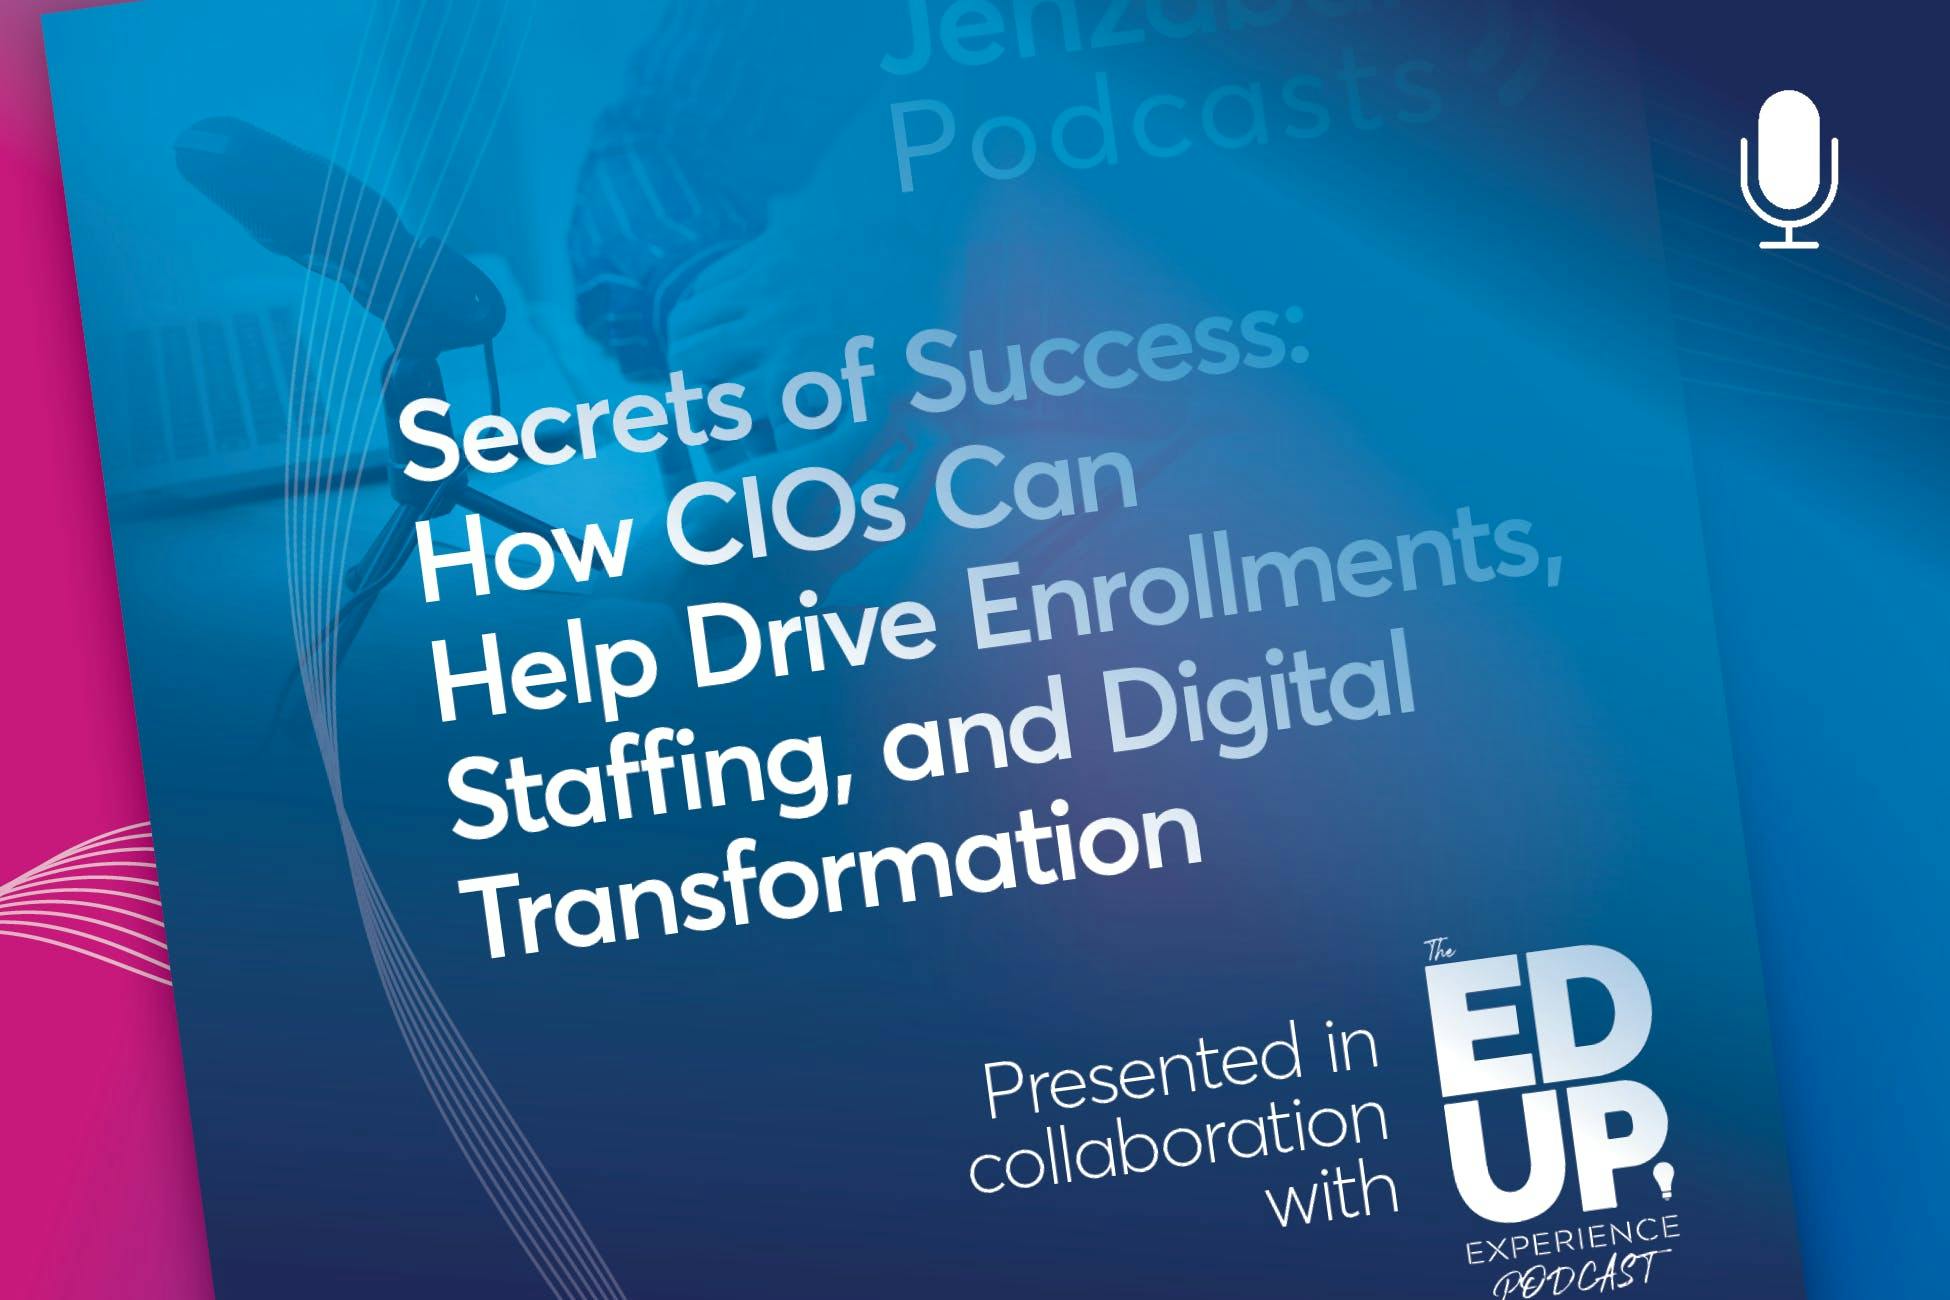 Podcast: Secrets of Success: How CIOs Can Help Drive Enrollments, Staffing, and Digital Transformation